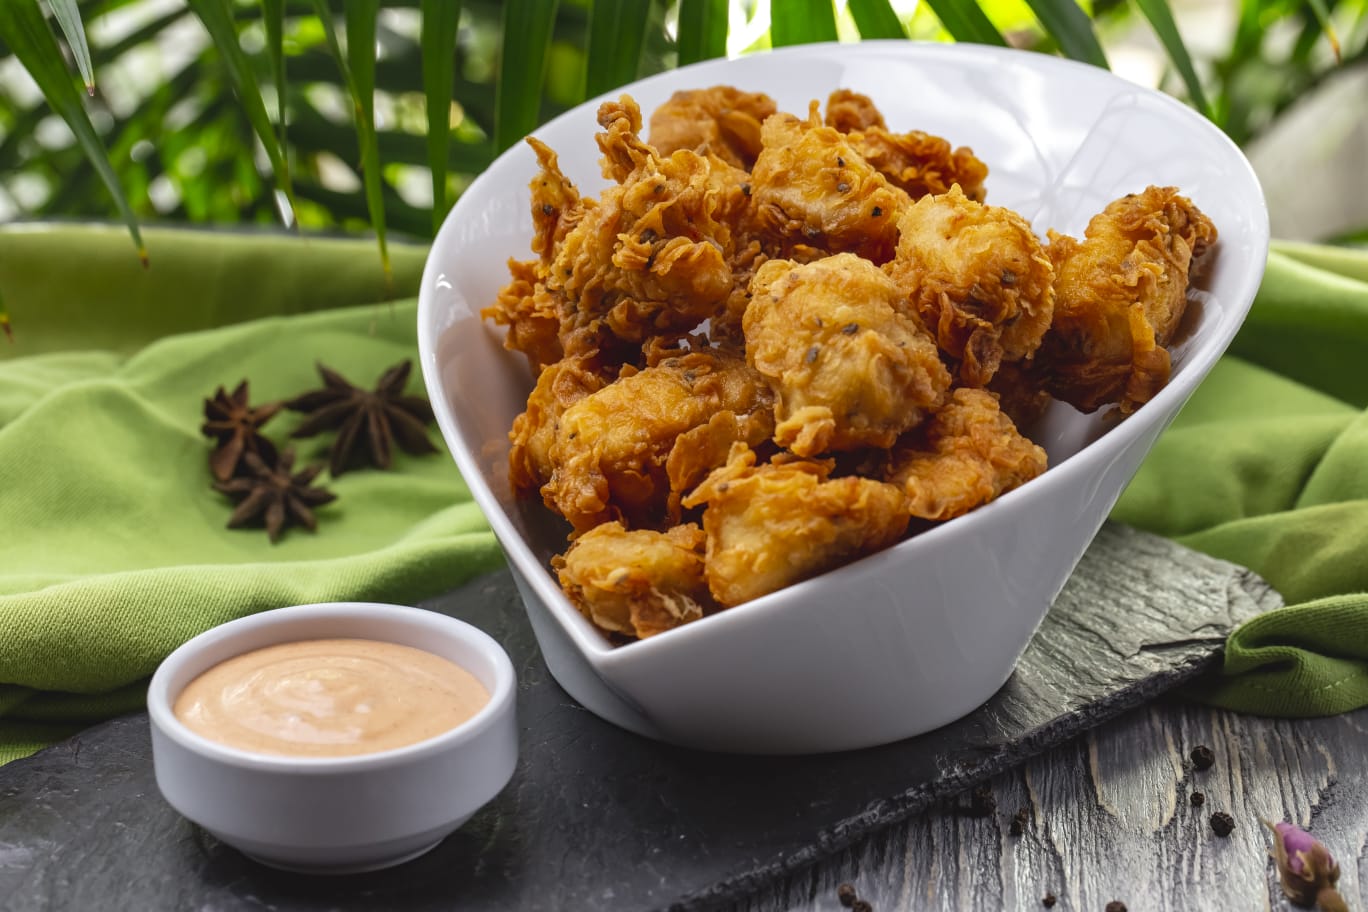 Ide Olahan Ayam Viral: Spicy Chicken Crispy With Ranch Sauce